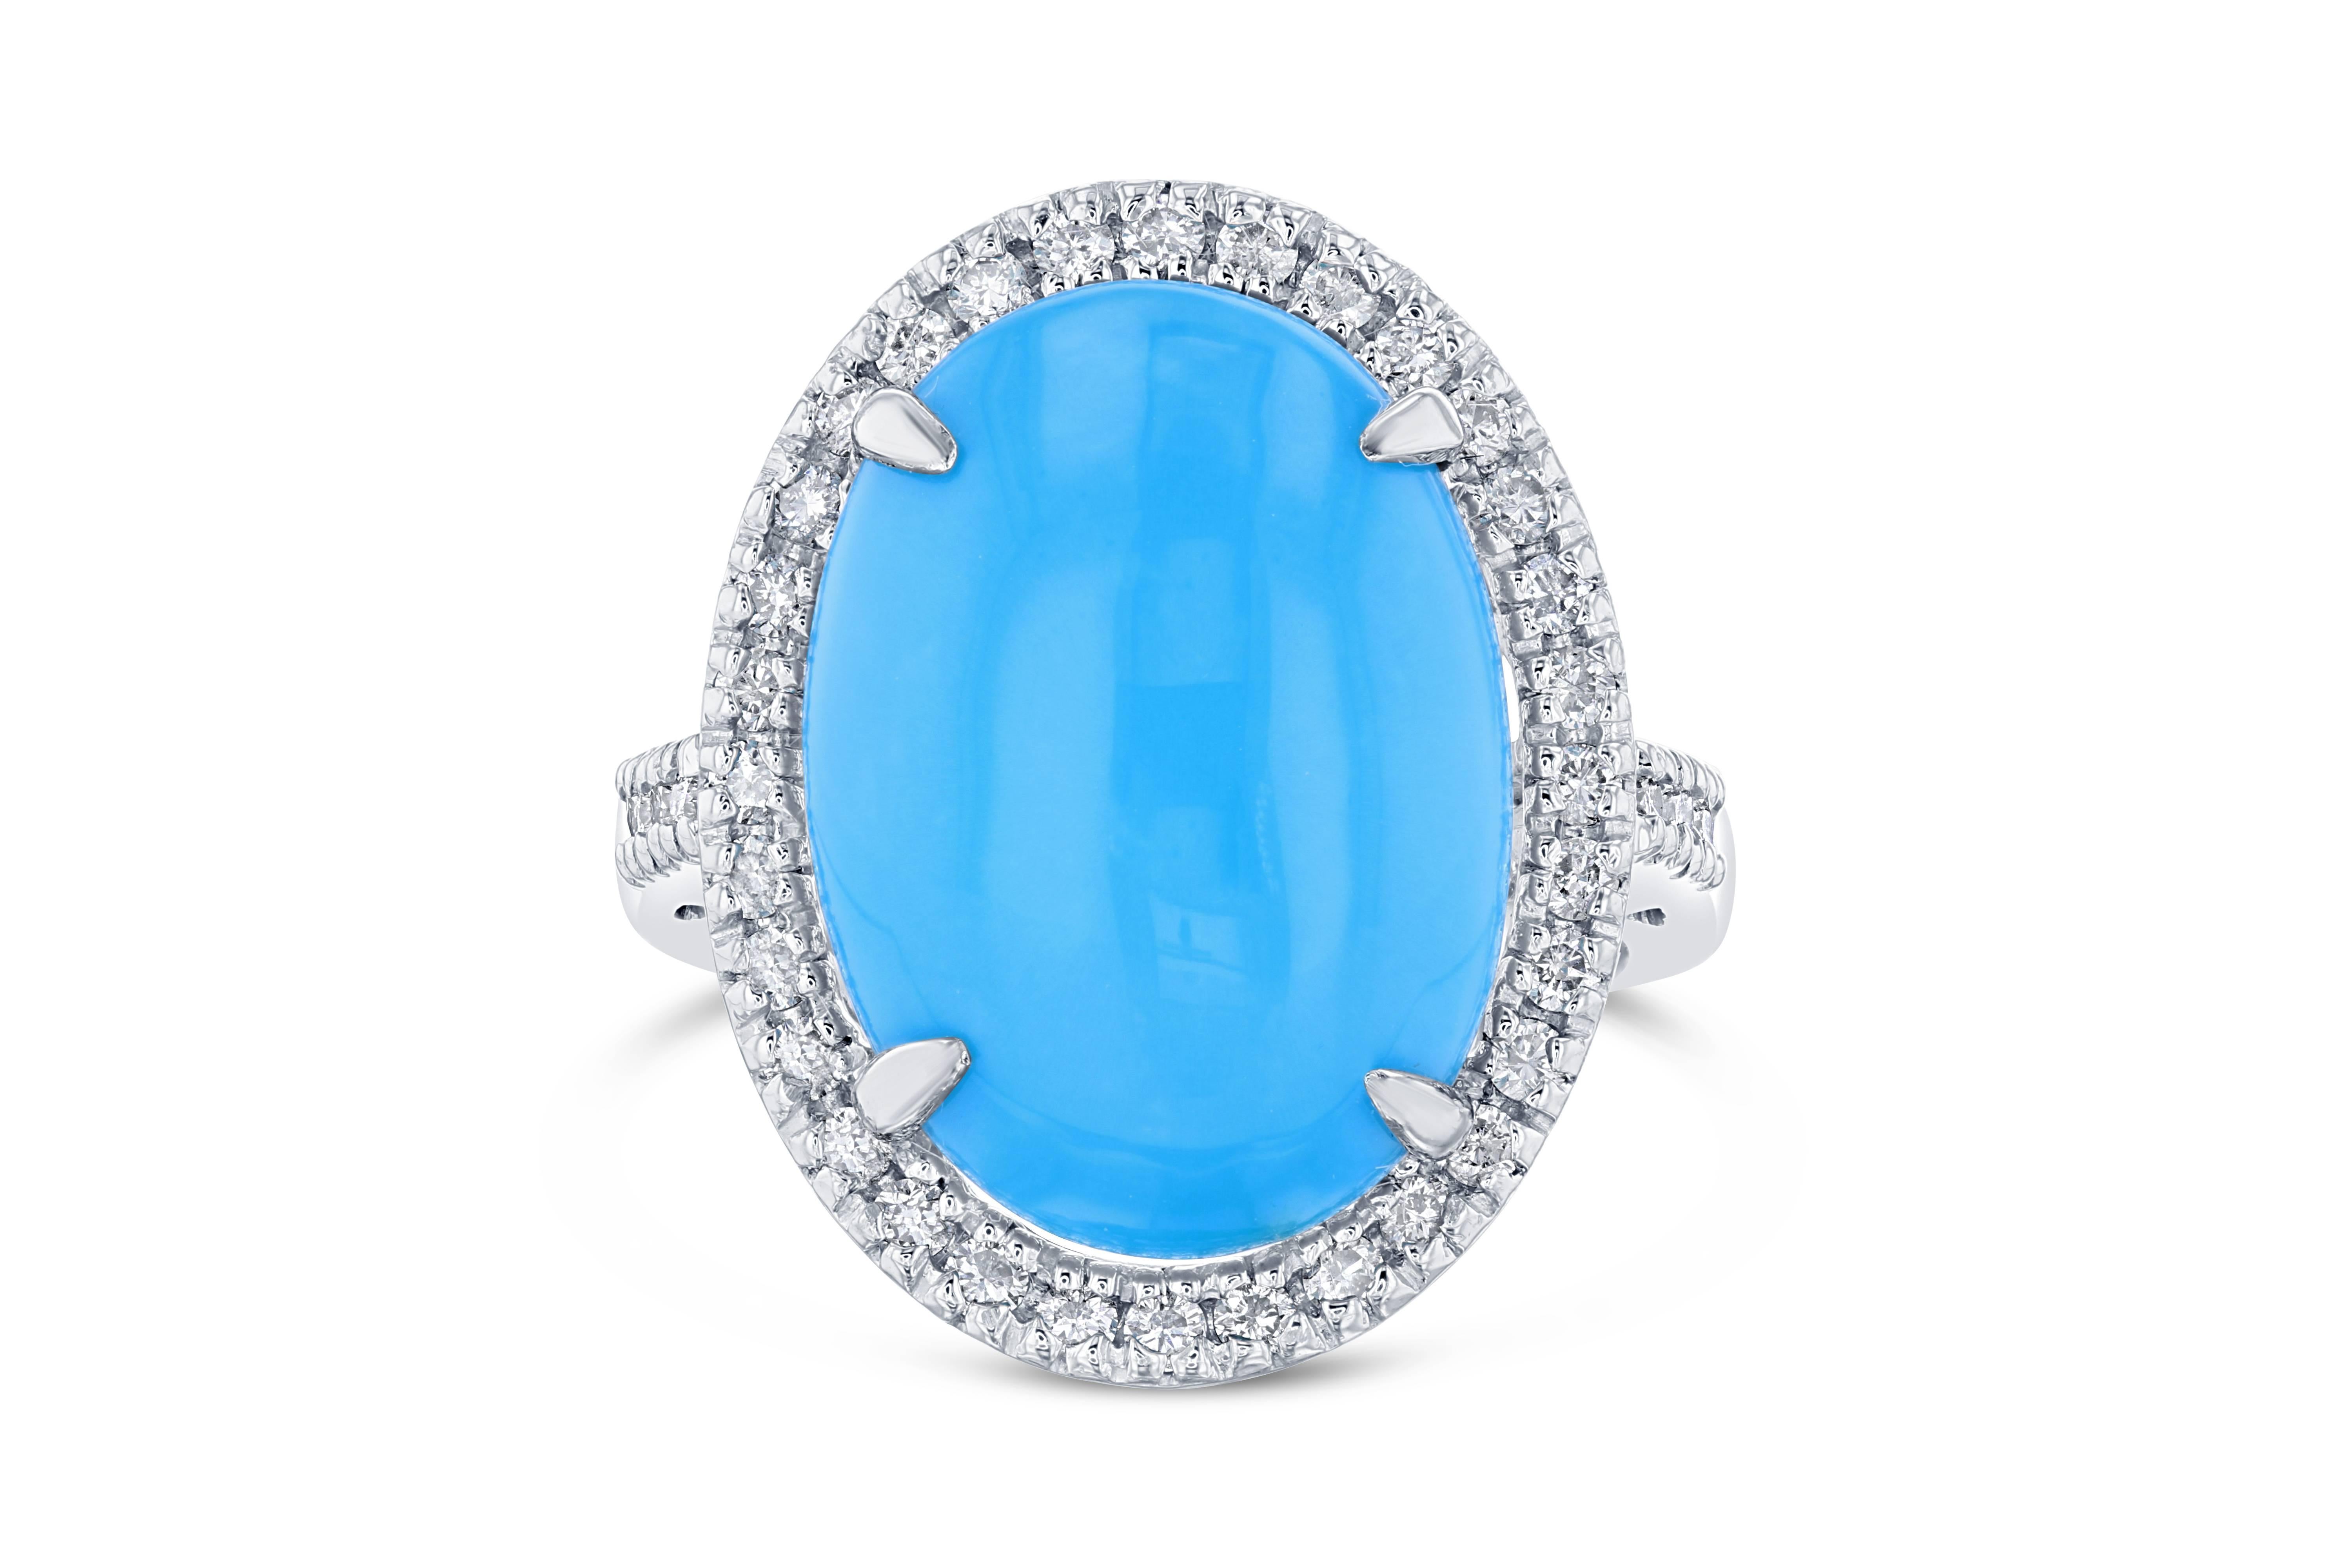 Beautiful Turquoise Diamond Cabochon Cocktail Ring!
The Oval Cut Cabochon Turquoise is 8.79 Carats and has a halo of 38 Round Cut Diamonds weighing 0.56 Carats. The total carat weight of the ring is 9.35 Carats. It is crafted in 14K White Gold and